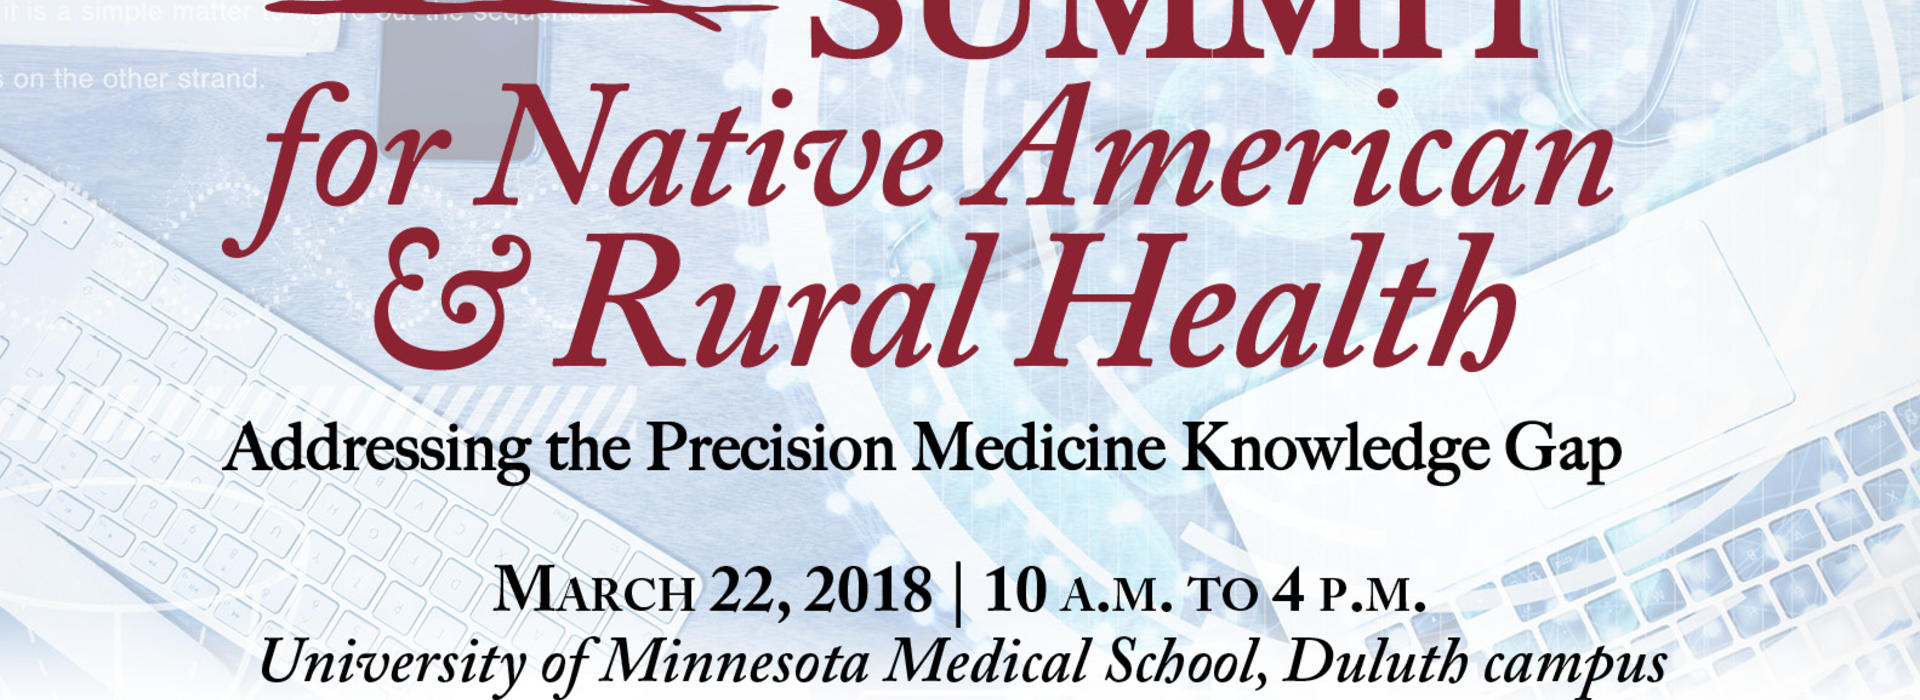 Summit for Native American & Rural Health